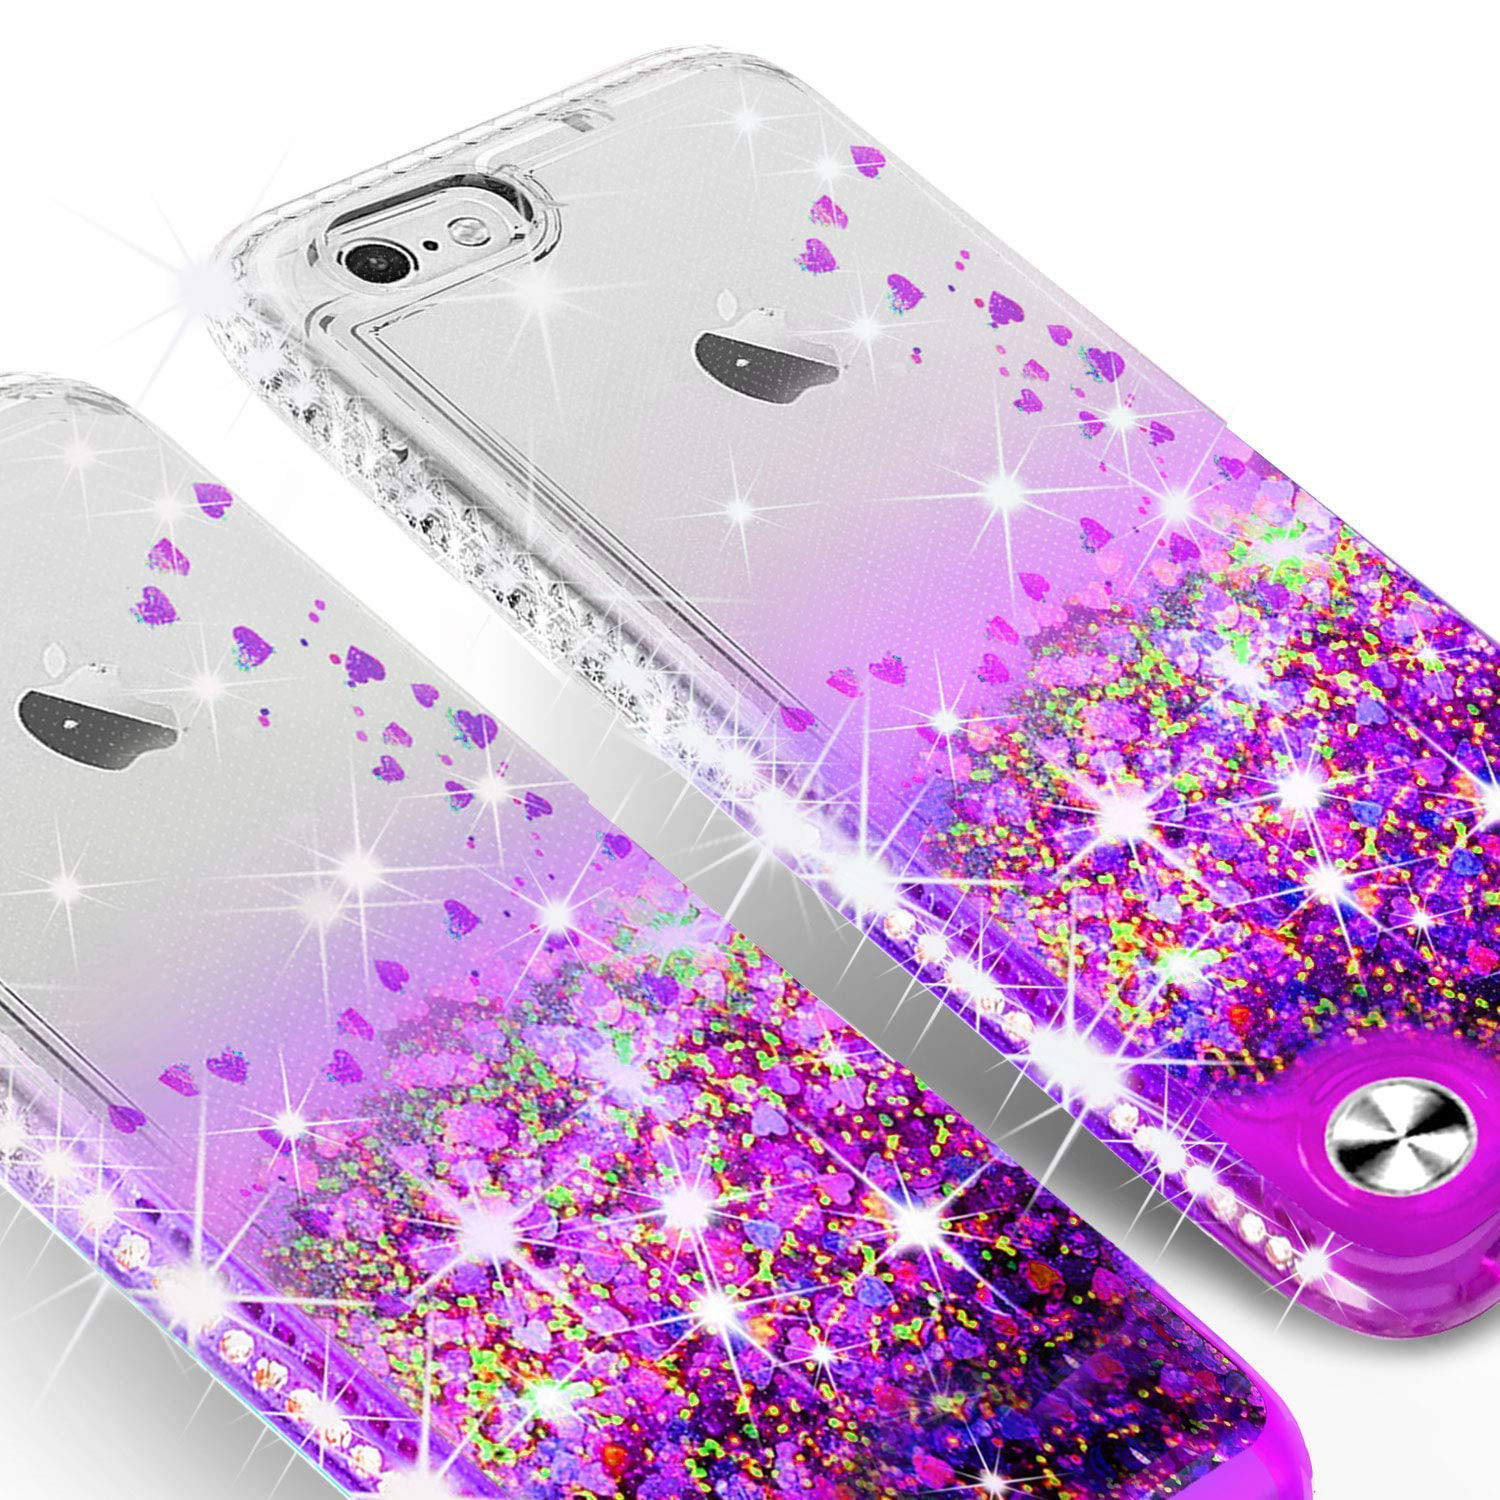 Buy iPhone 7/8 Plus Case Girls with Stand,iPhone 8 Plus Clear Waterfall Case  Ultra Thin Slim Bling Glitter Sparkle Quicksand Soft Case Cover with Ring  Stand for Apple iPhone 7 Plus/iPhone 8